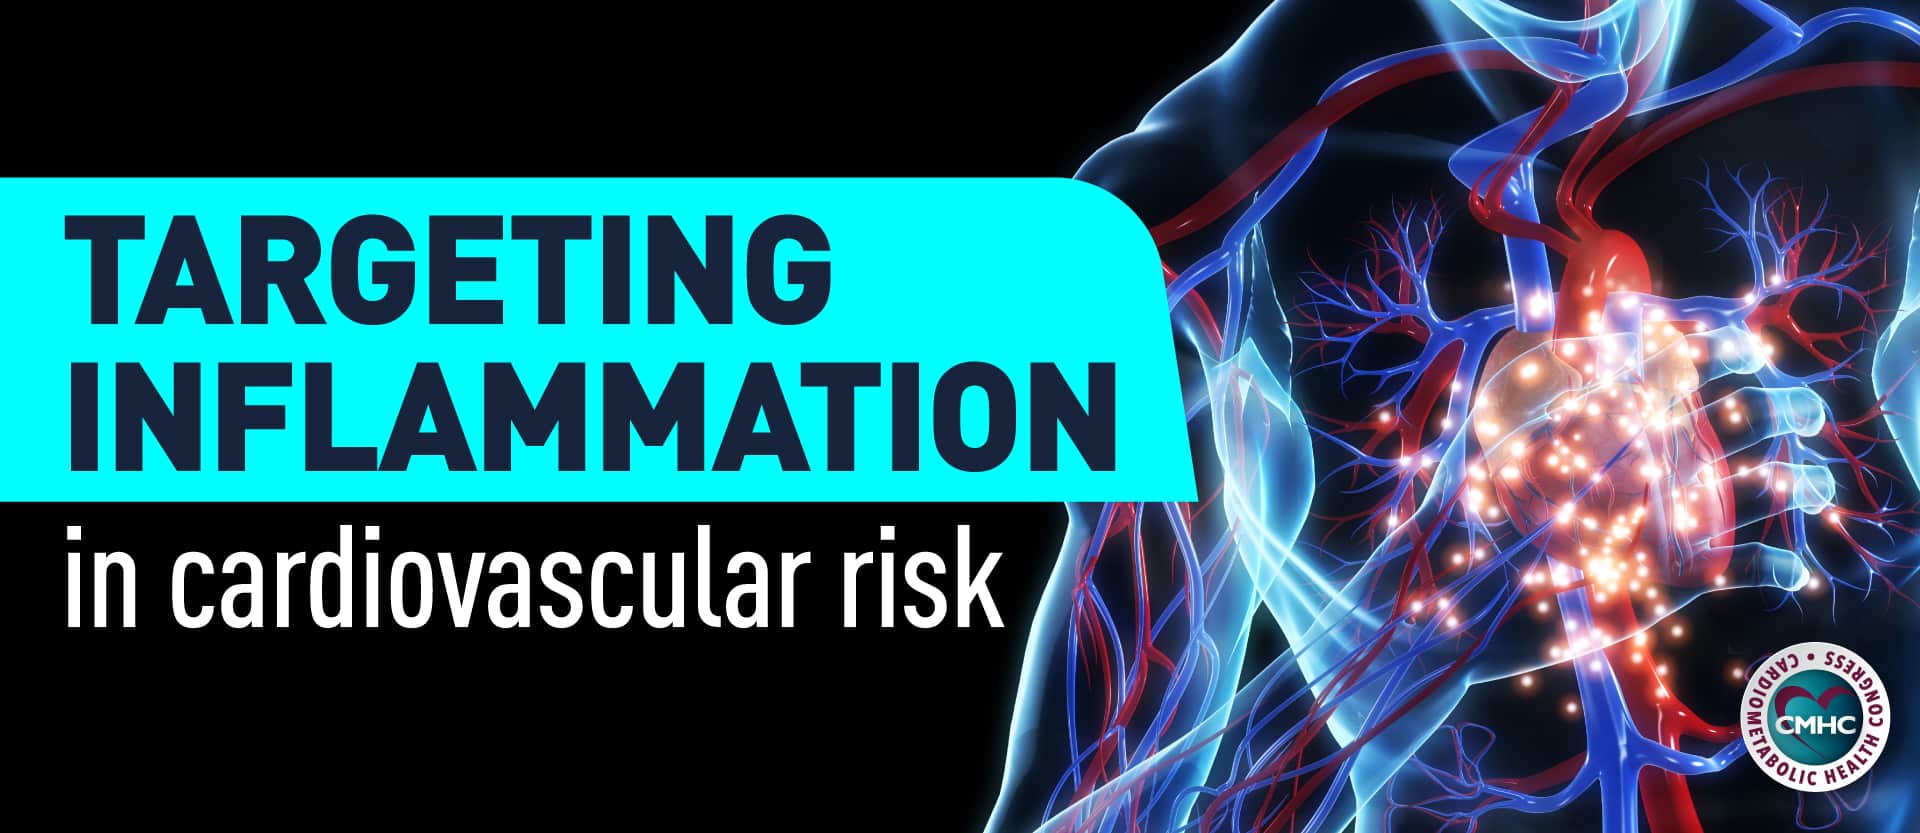 Targeting inflammation in cardiovascular risk